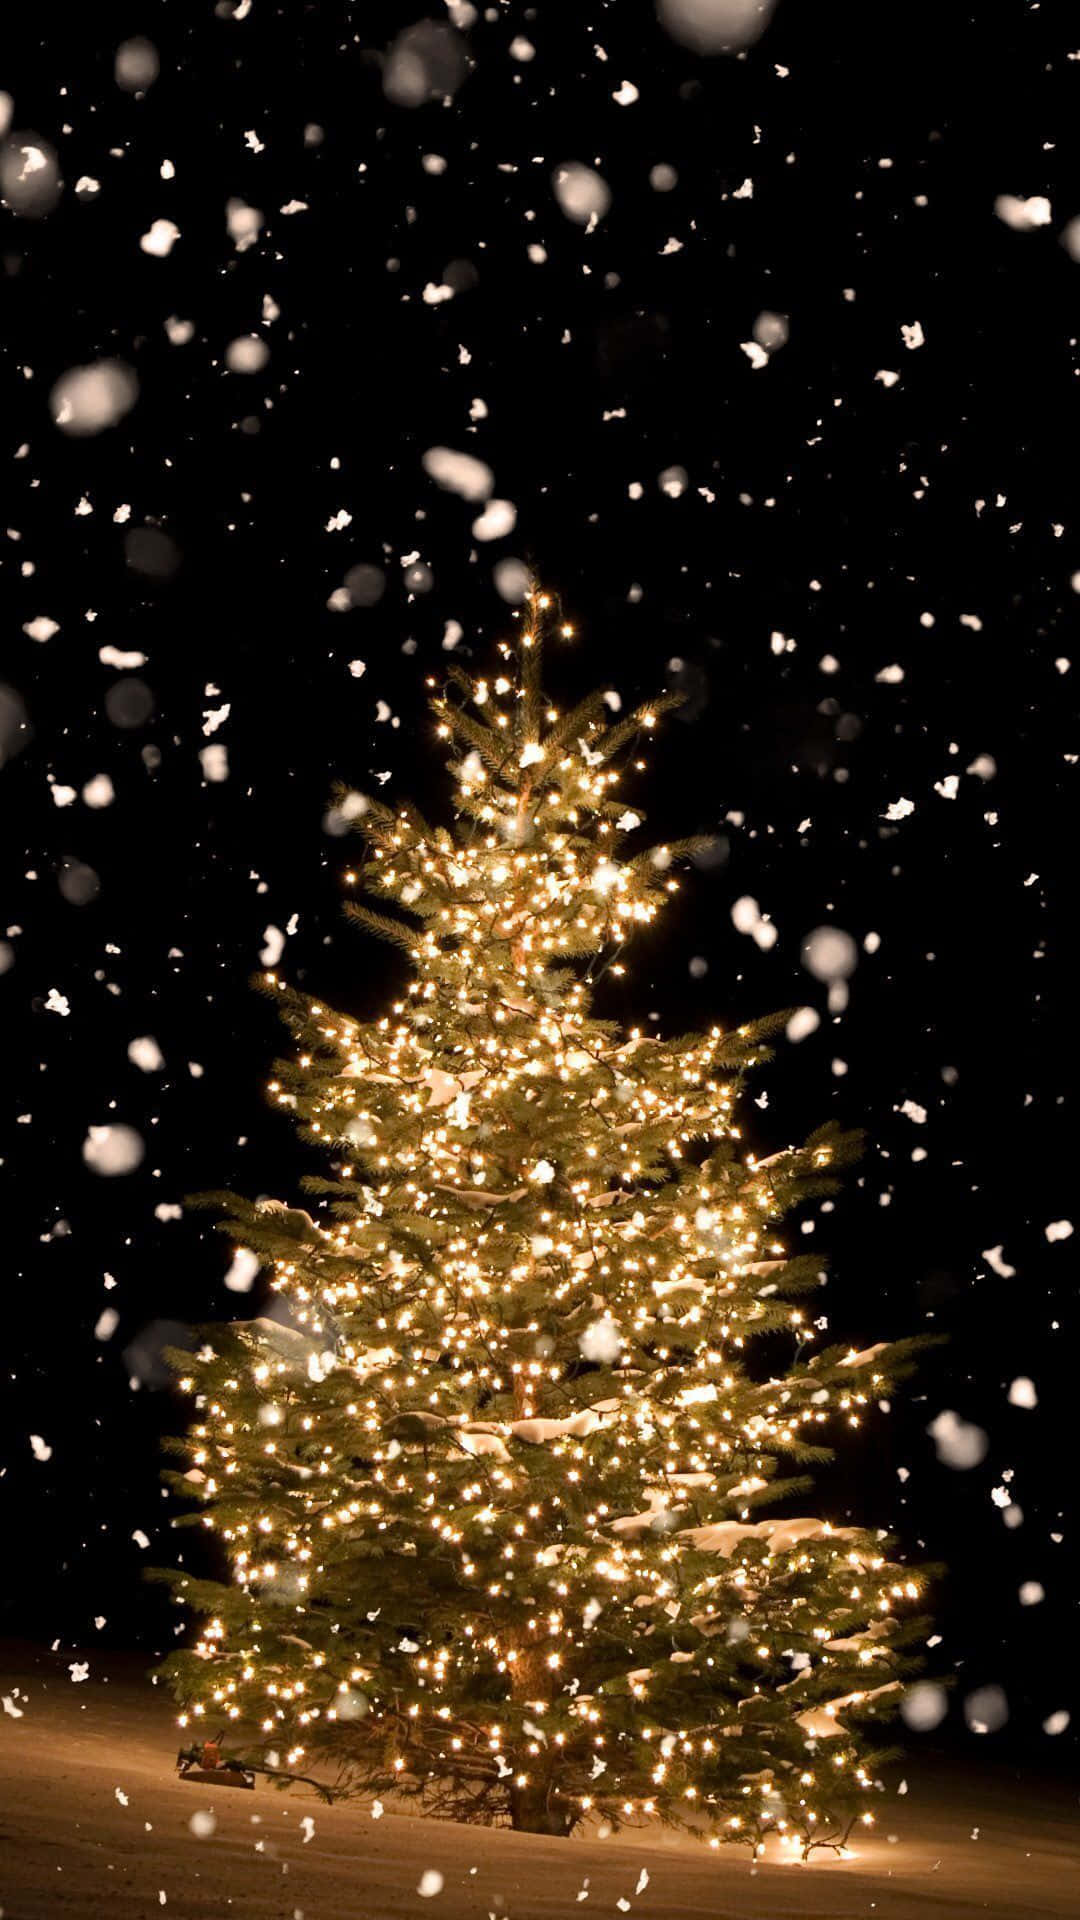 A tranquil night with a breathtakingly beautiful Christmas Tree Wallpaper